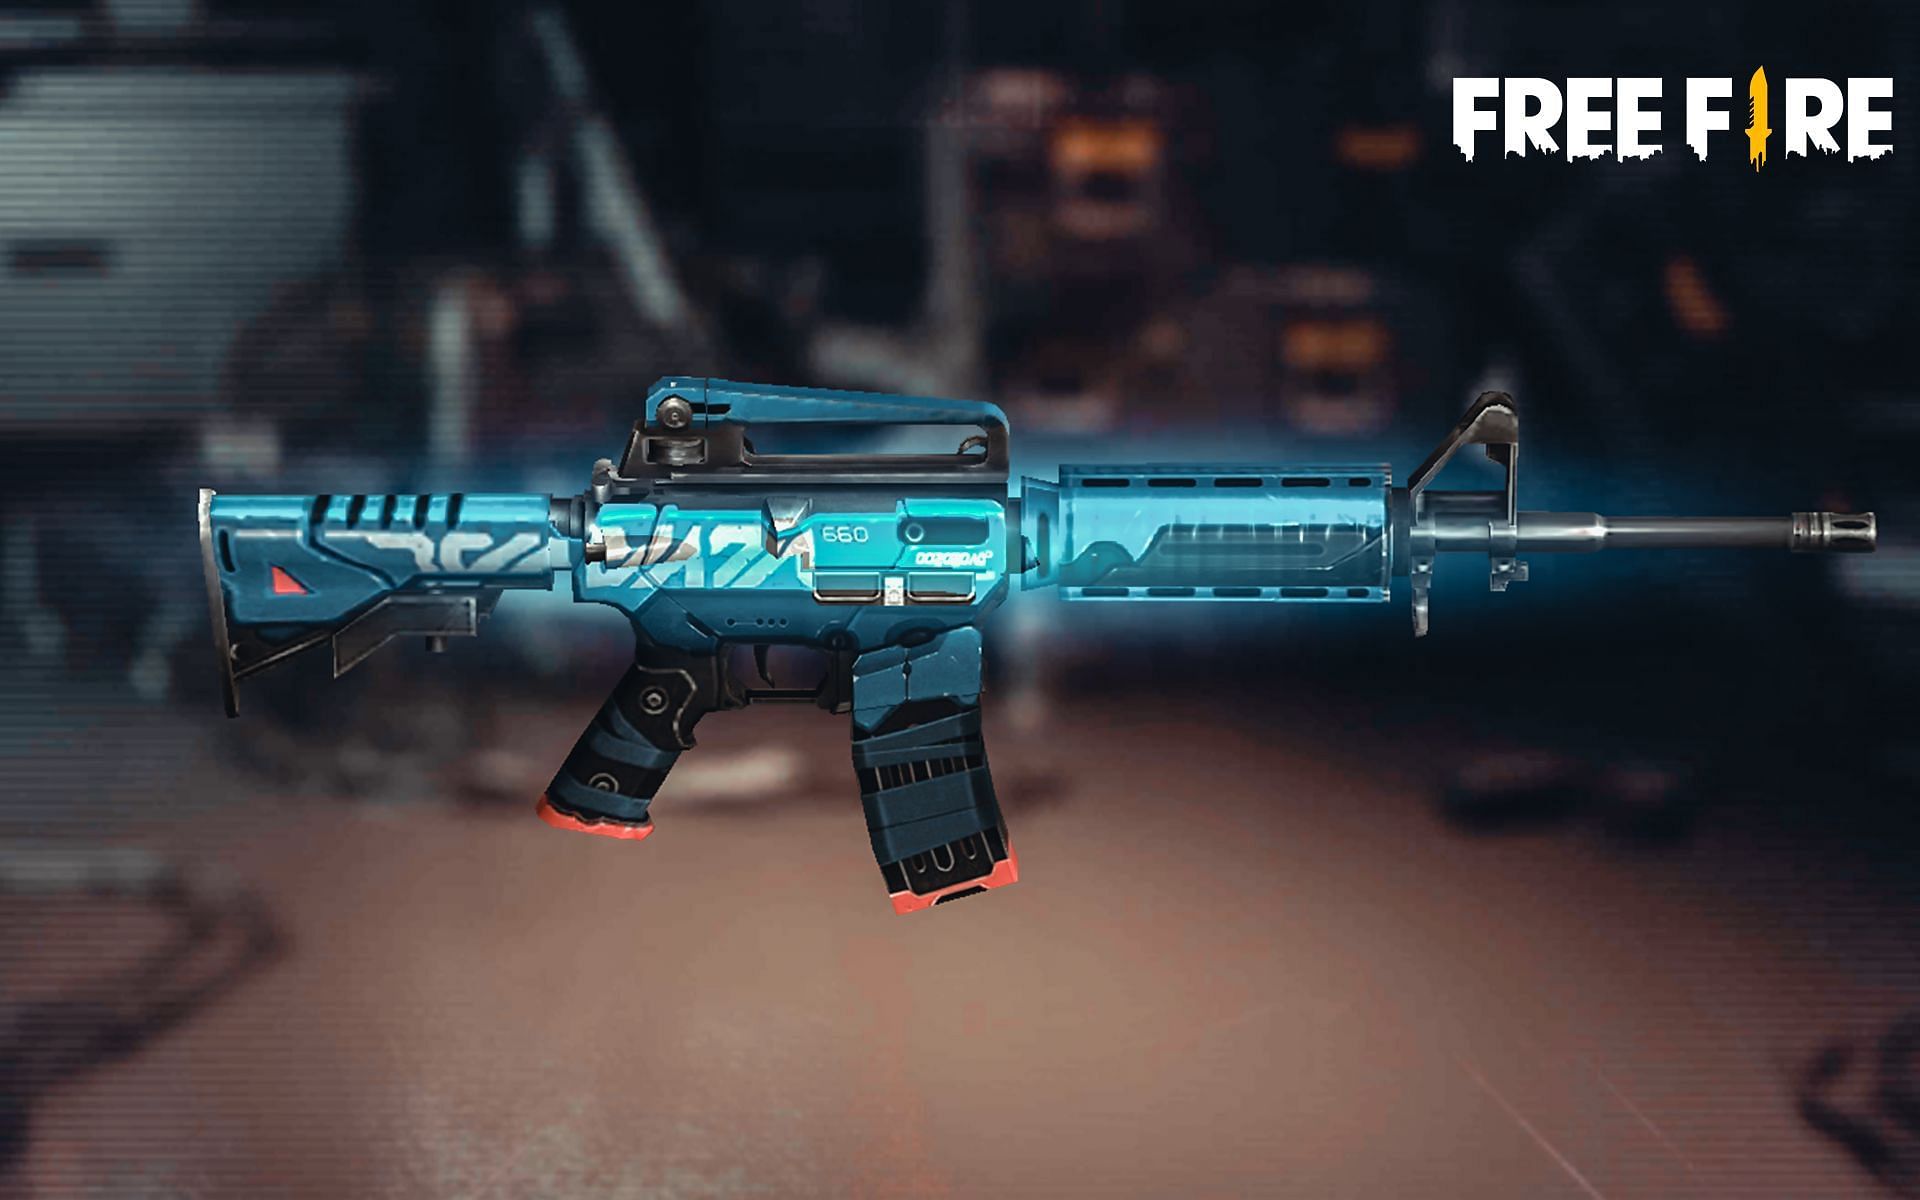 This skin will be available for free if the milestone is crossed (Image via Free Fire)